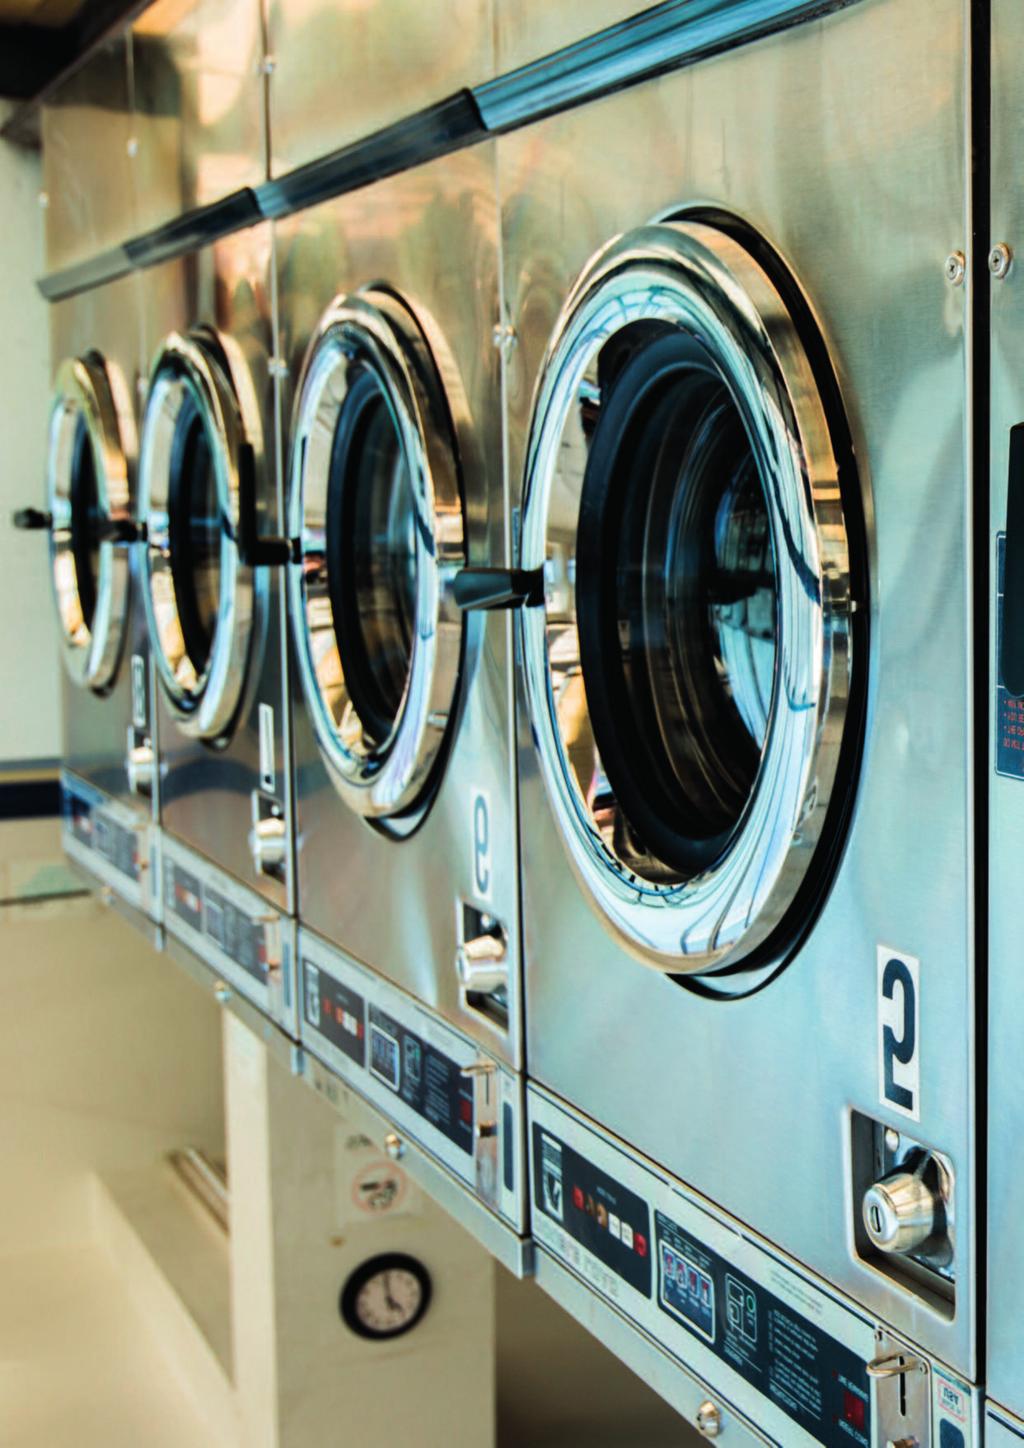 Laundry SEKO Solutions for a Smarter Laundry Running and supplying on-premise or commercial laundries a complex business and accurate, reliable dosing management is one aspect that needs to be